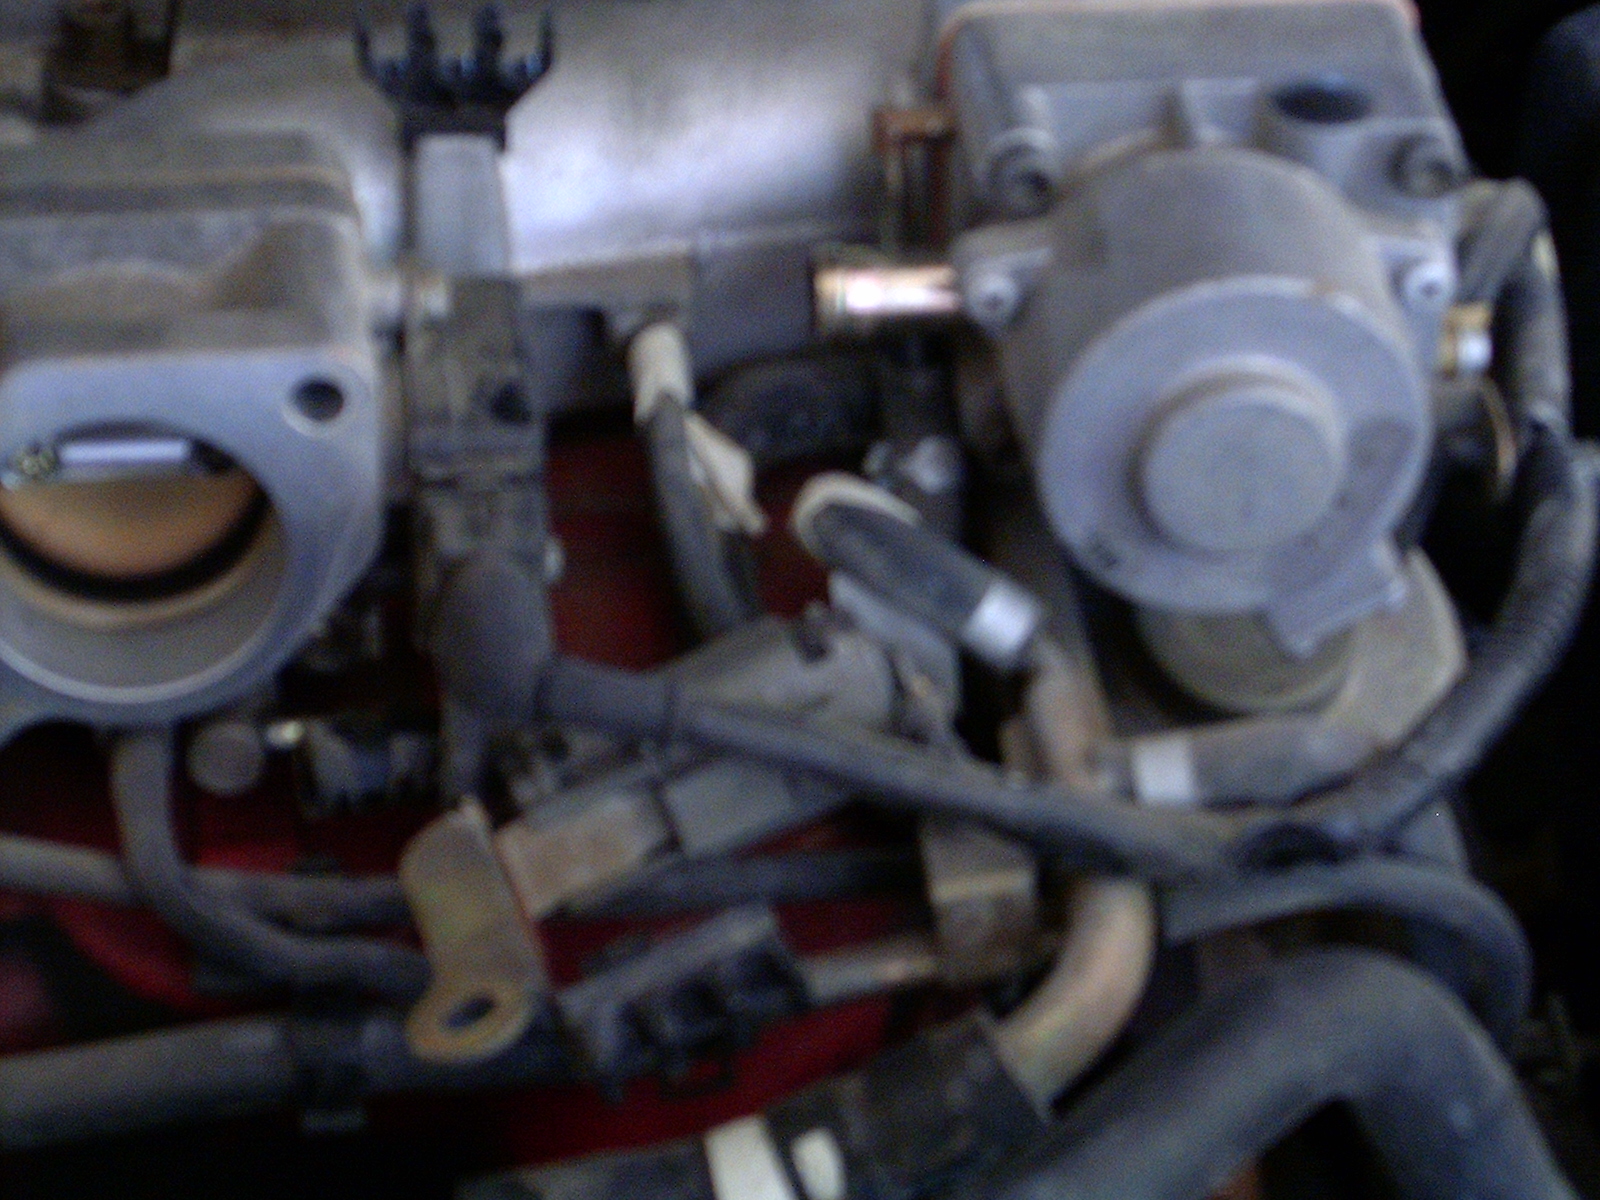 95 Nissan maxima fuel injector removal #2